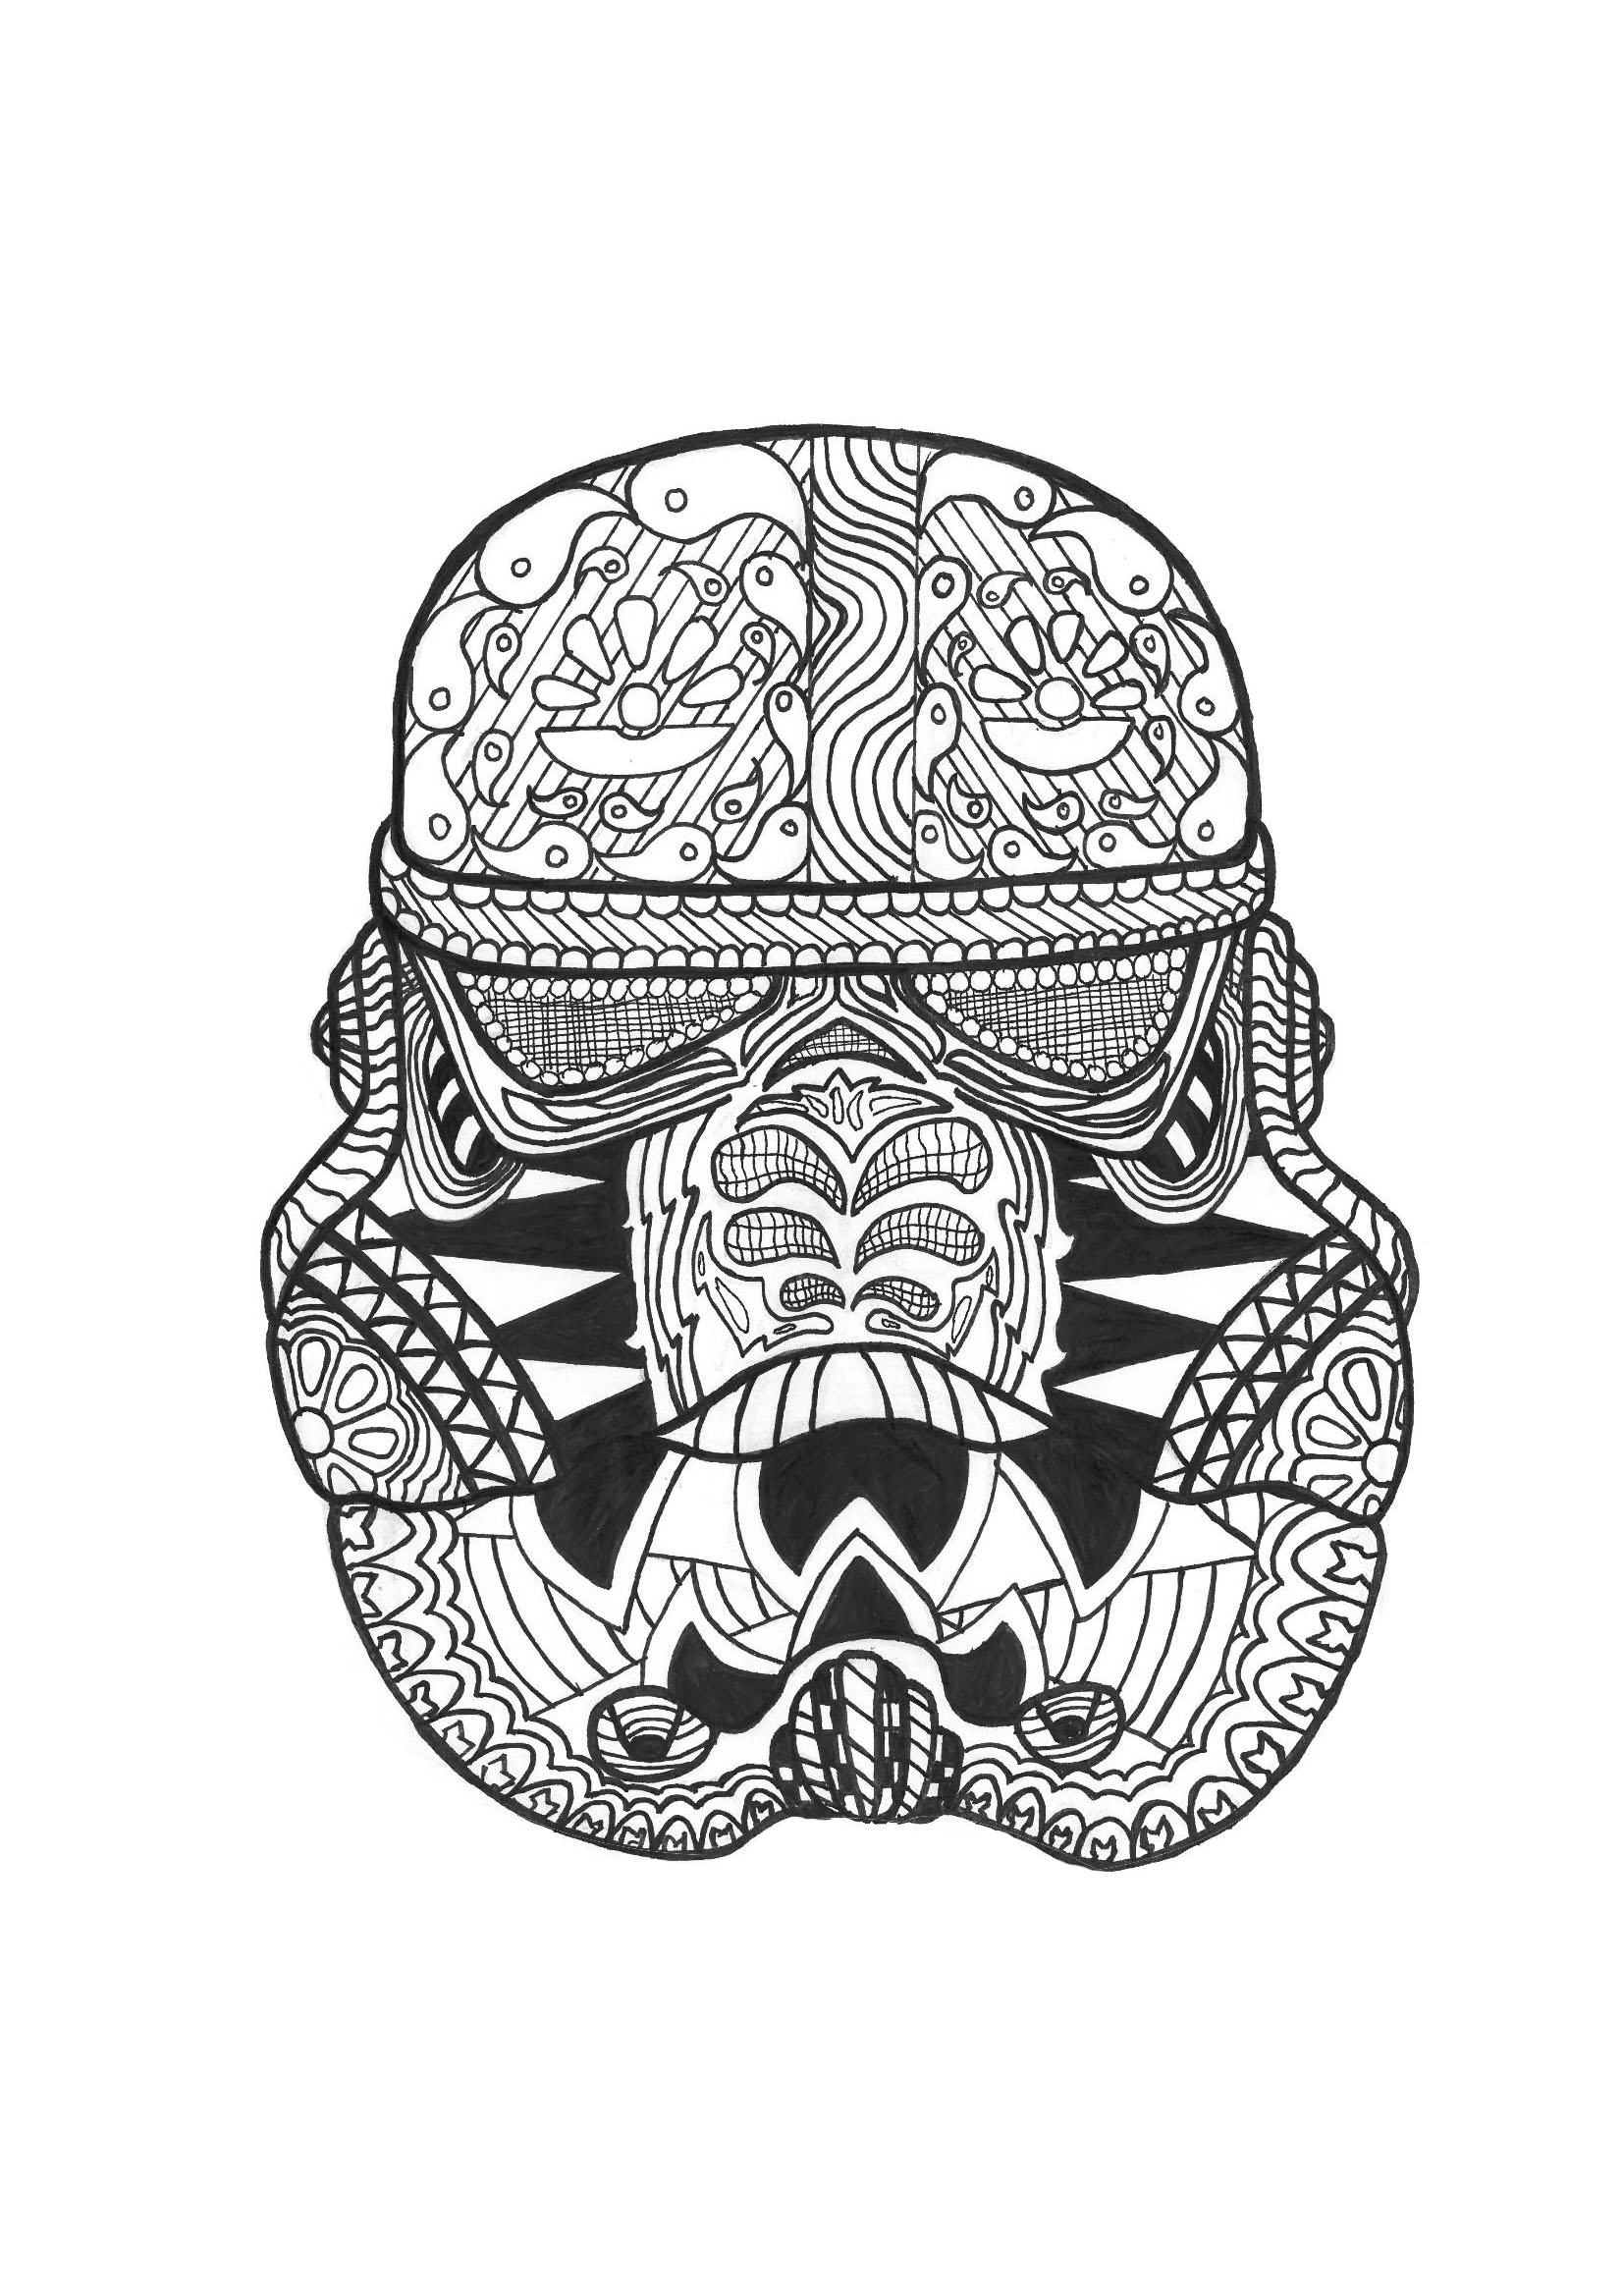 Free Star Wars Coloring Pages For Adults